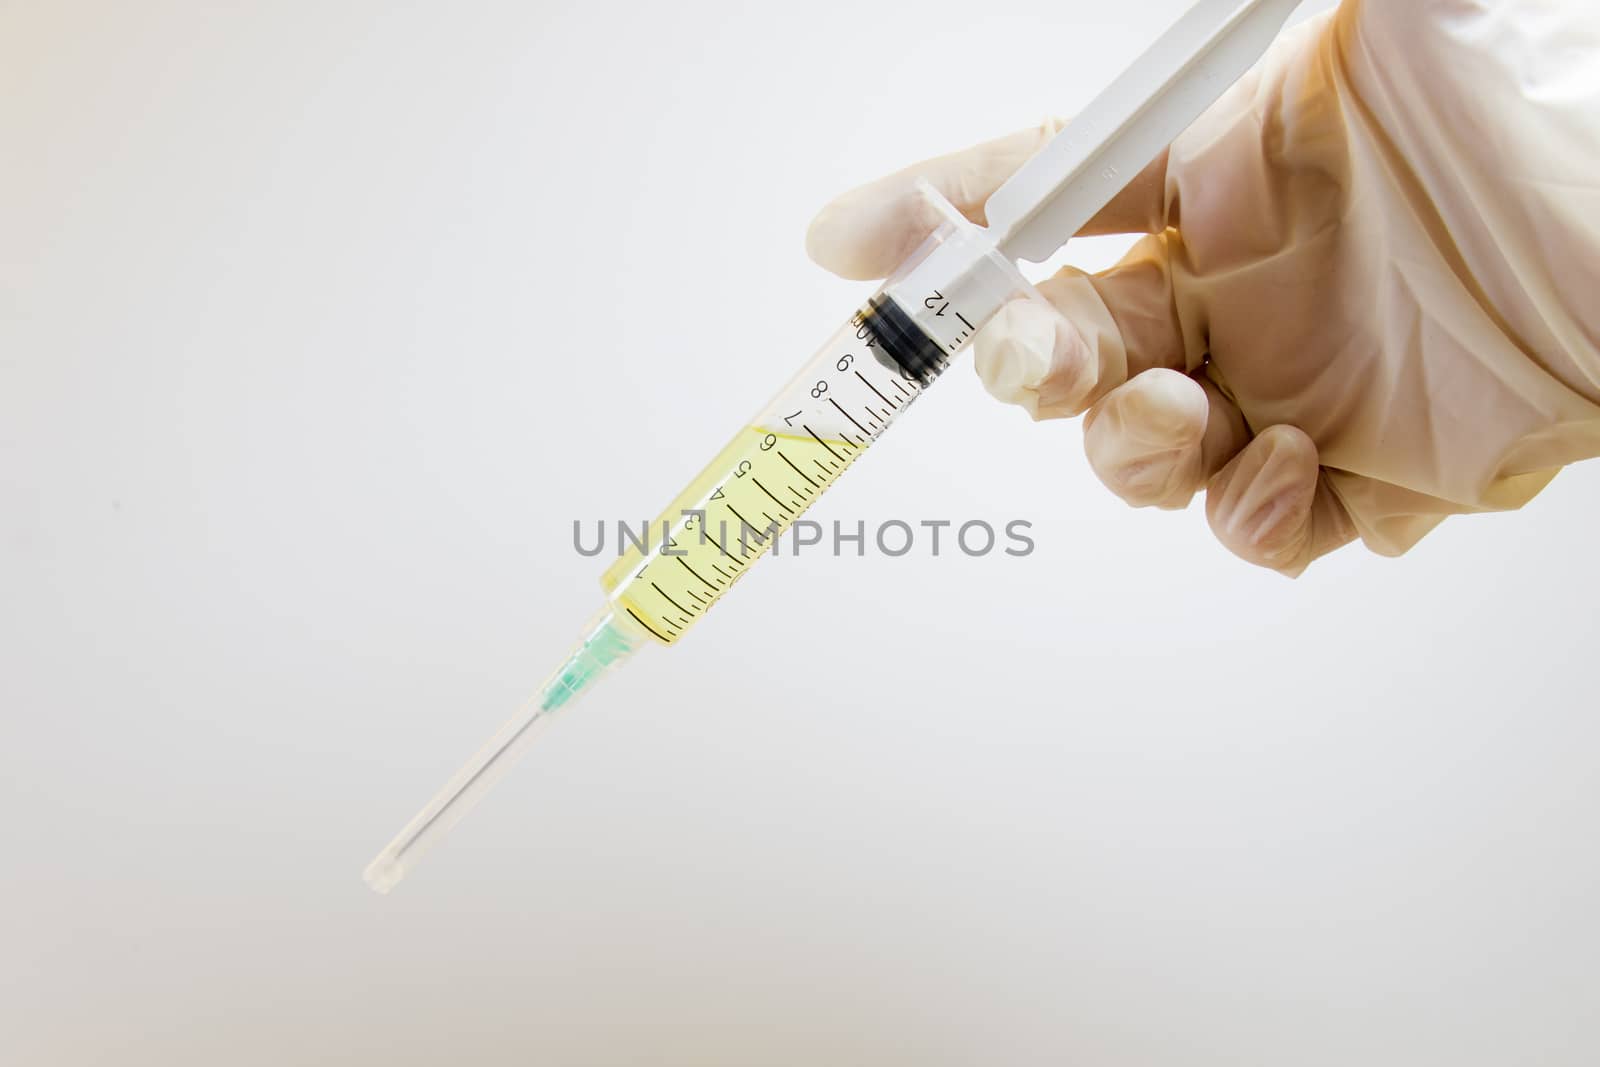 Medical needle and doctors hand with glove on the white background, corona virus or covid-19 vaccine in needle. Studio shoot.